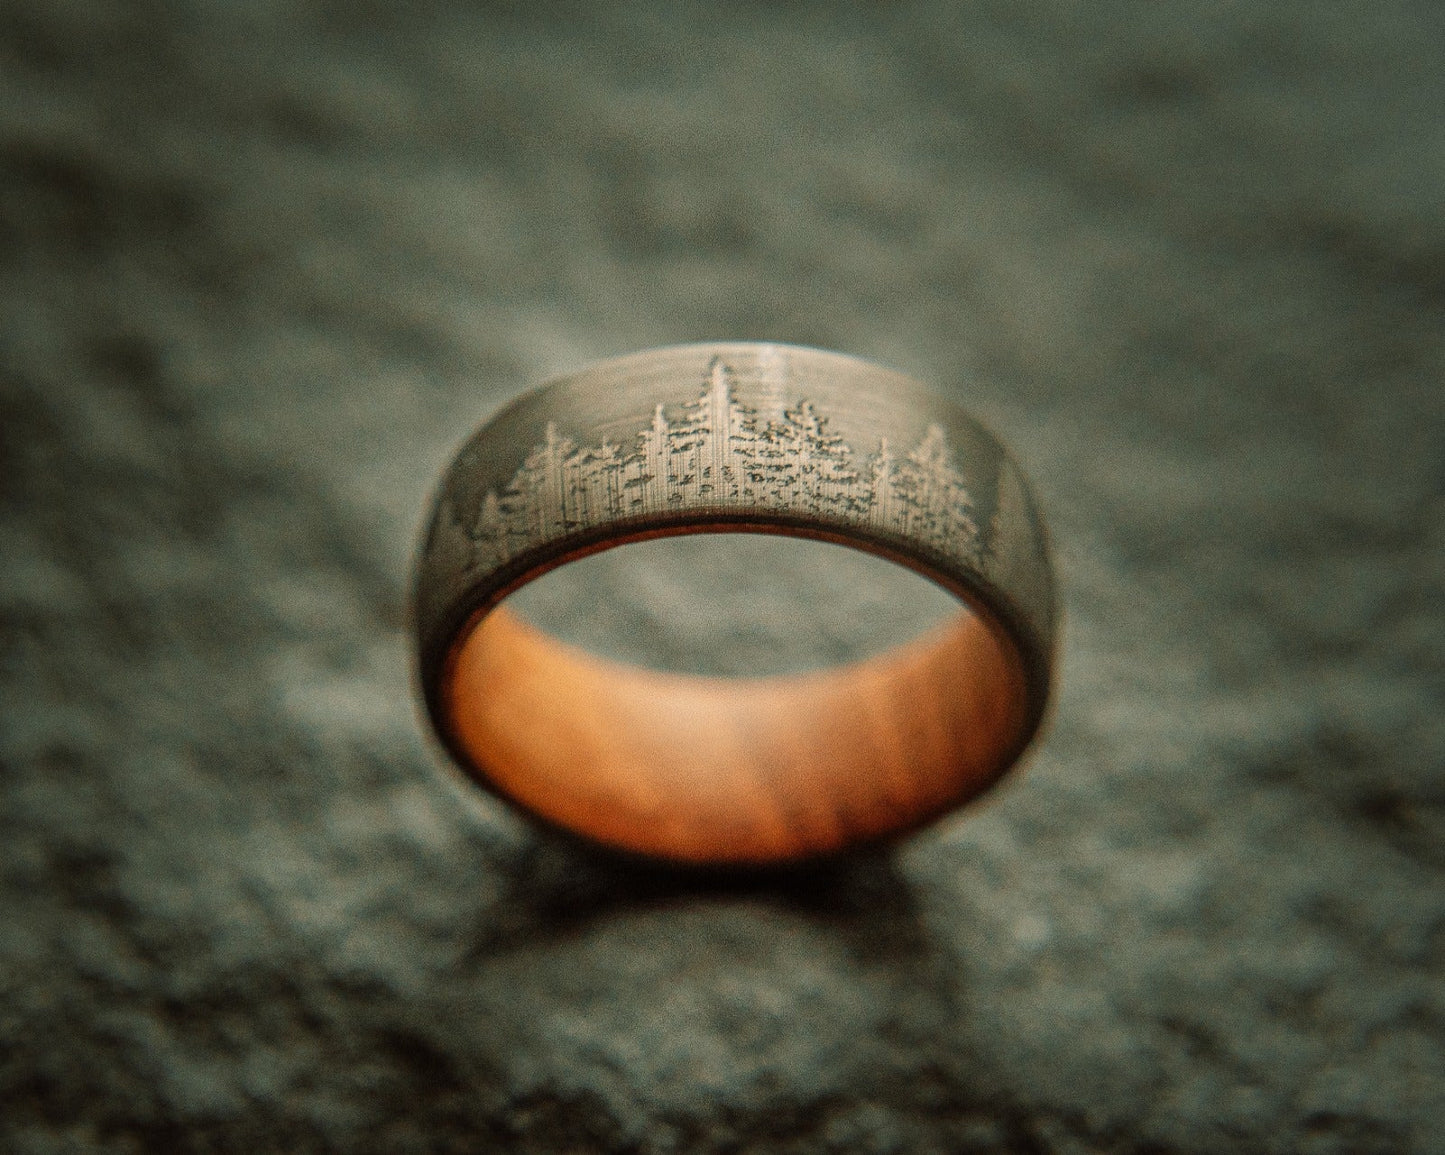 The "Outdoorsman" Ring